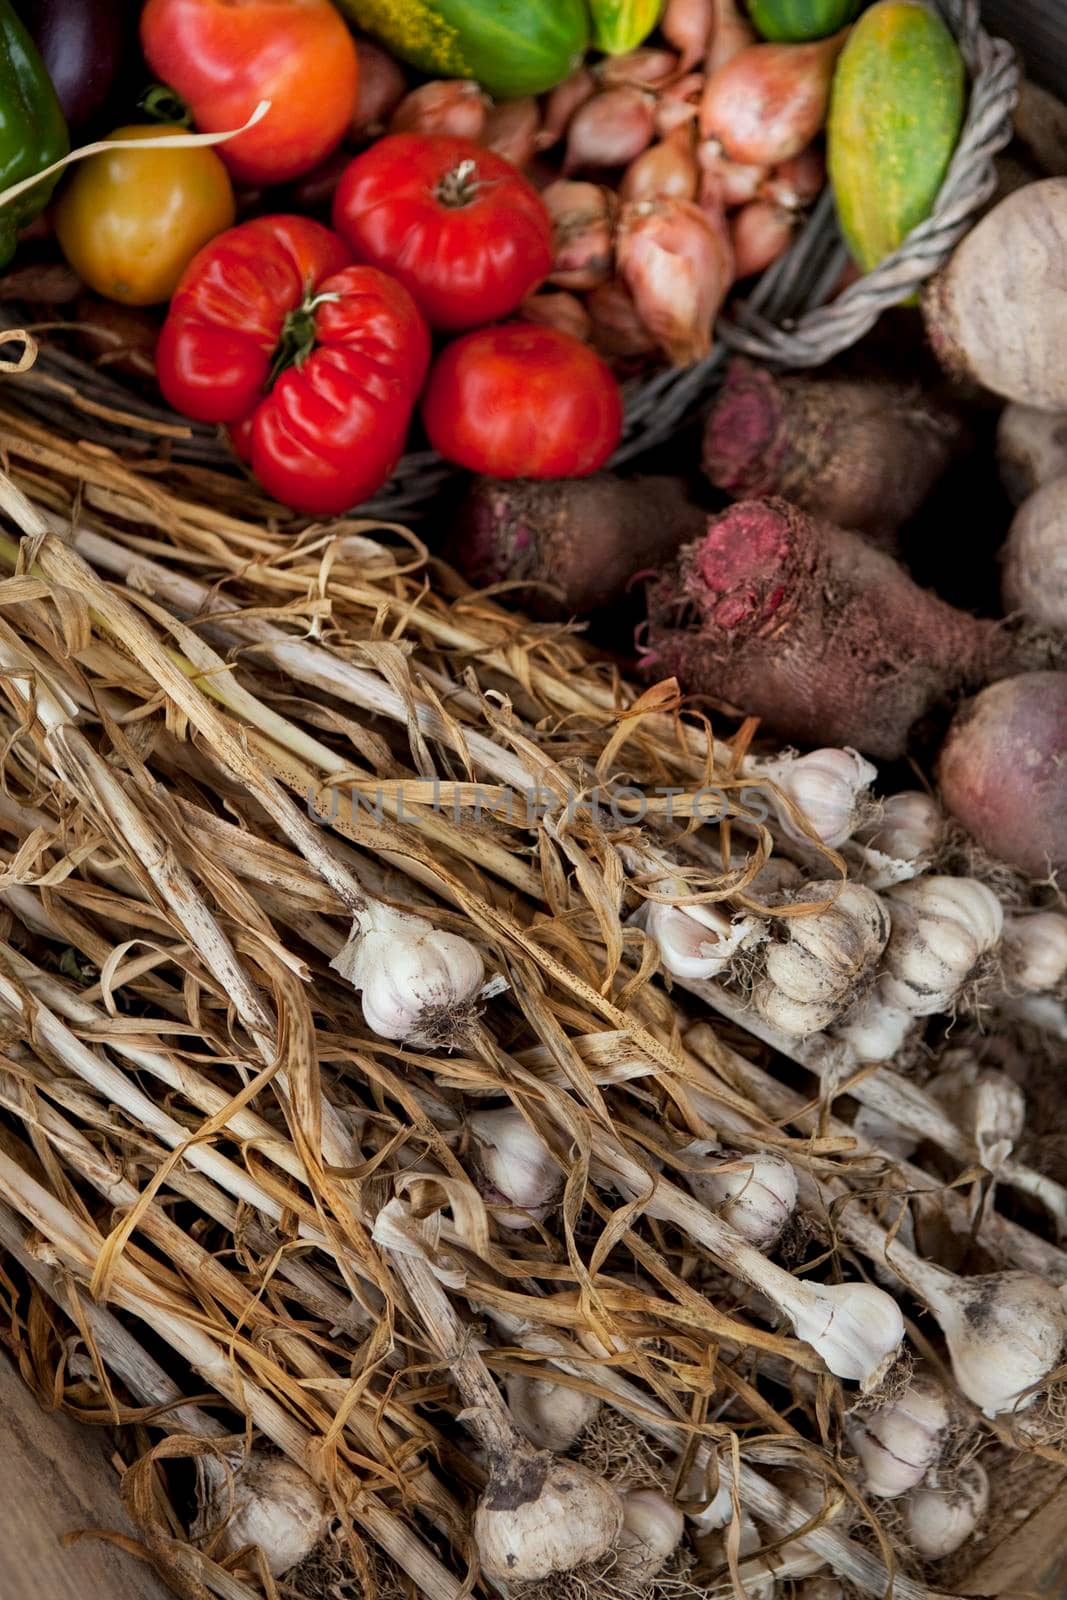 Bunch of garlic and vegetable on a market stall